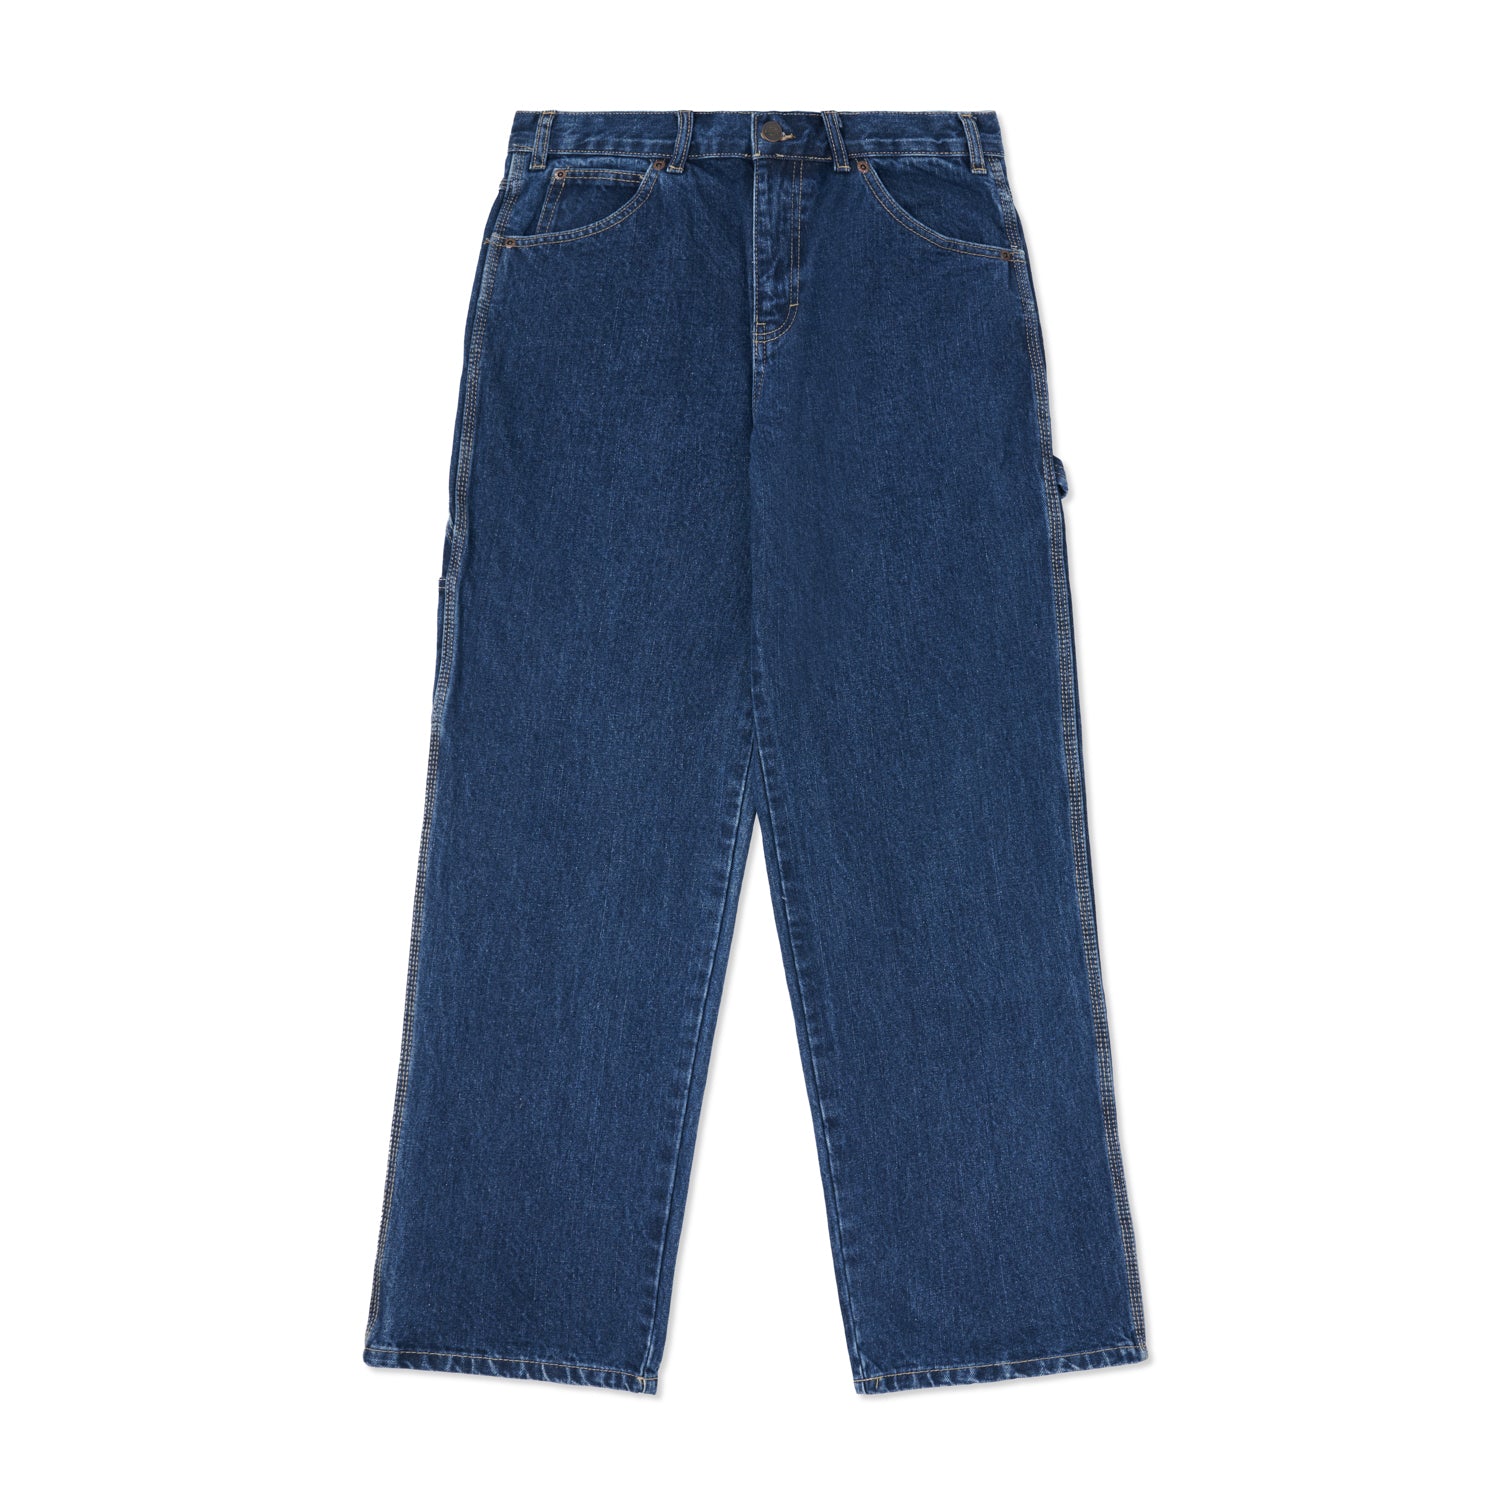 Relaxed Fit Carpenter Jean, Stone Washed Indigo